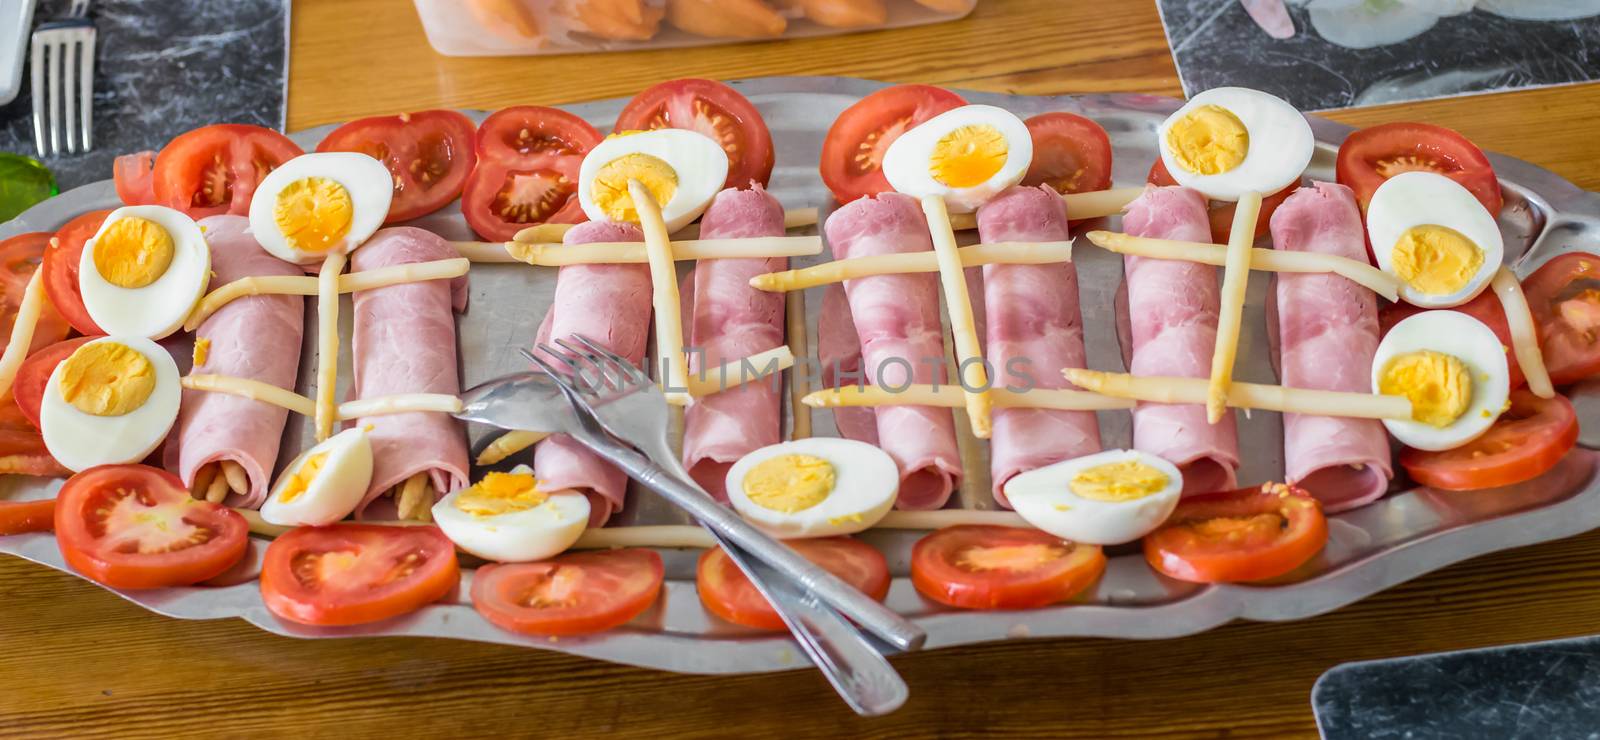 half boiled eggs, sliced tomatoes, ham and asparagus in a metal tray. French food